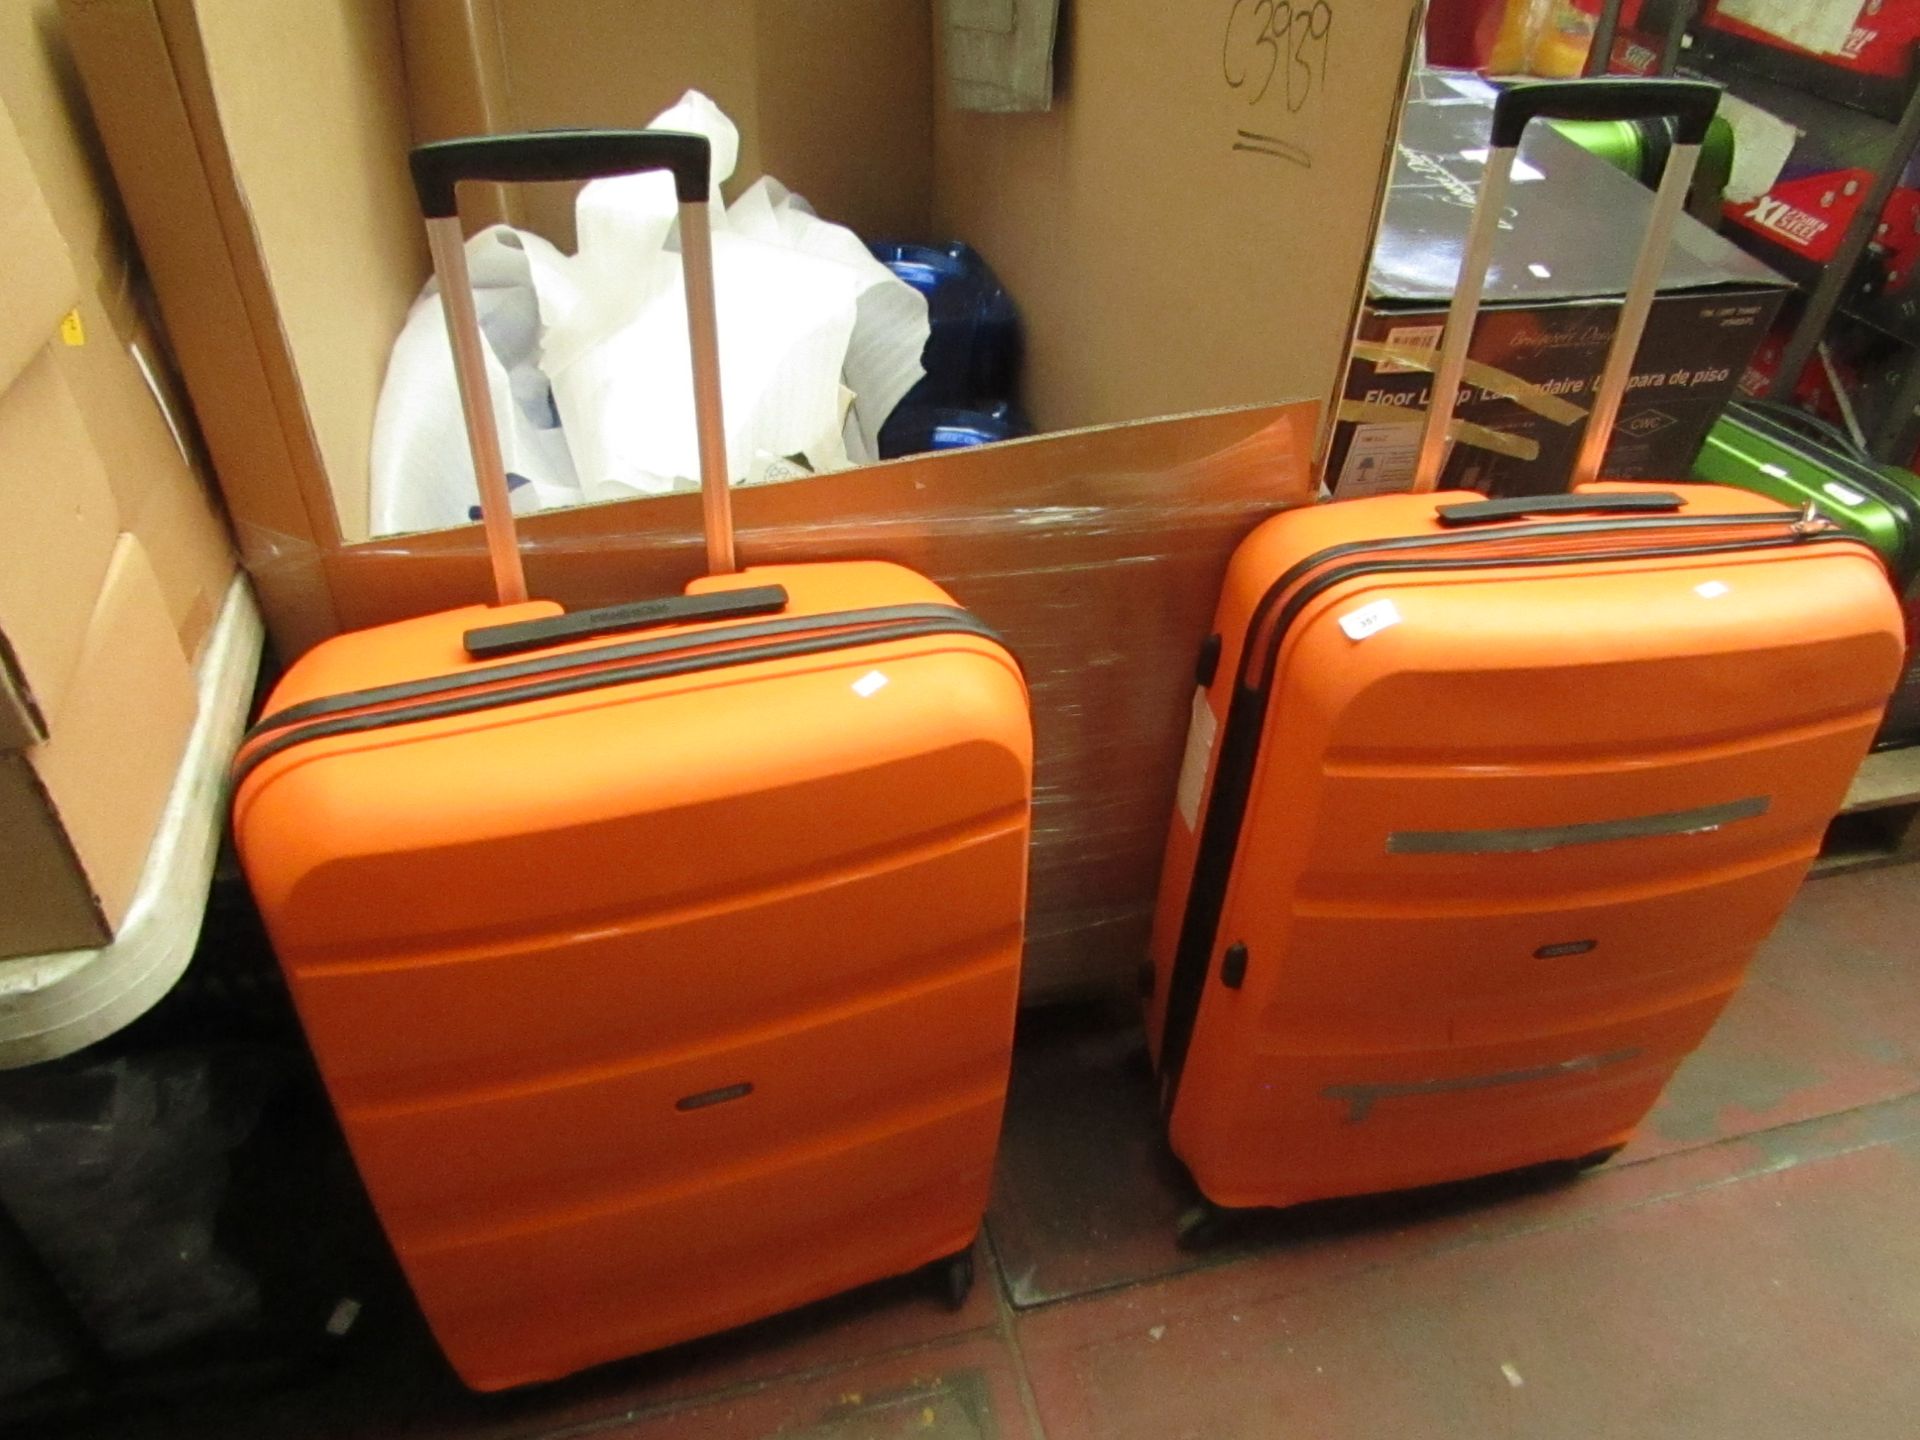 2 x American Tourister Suitcases. These have been used and have a few scuffs but still usable